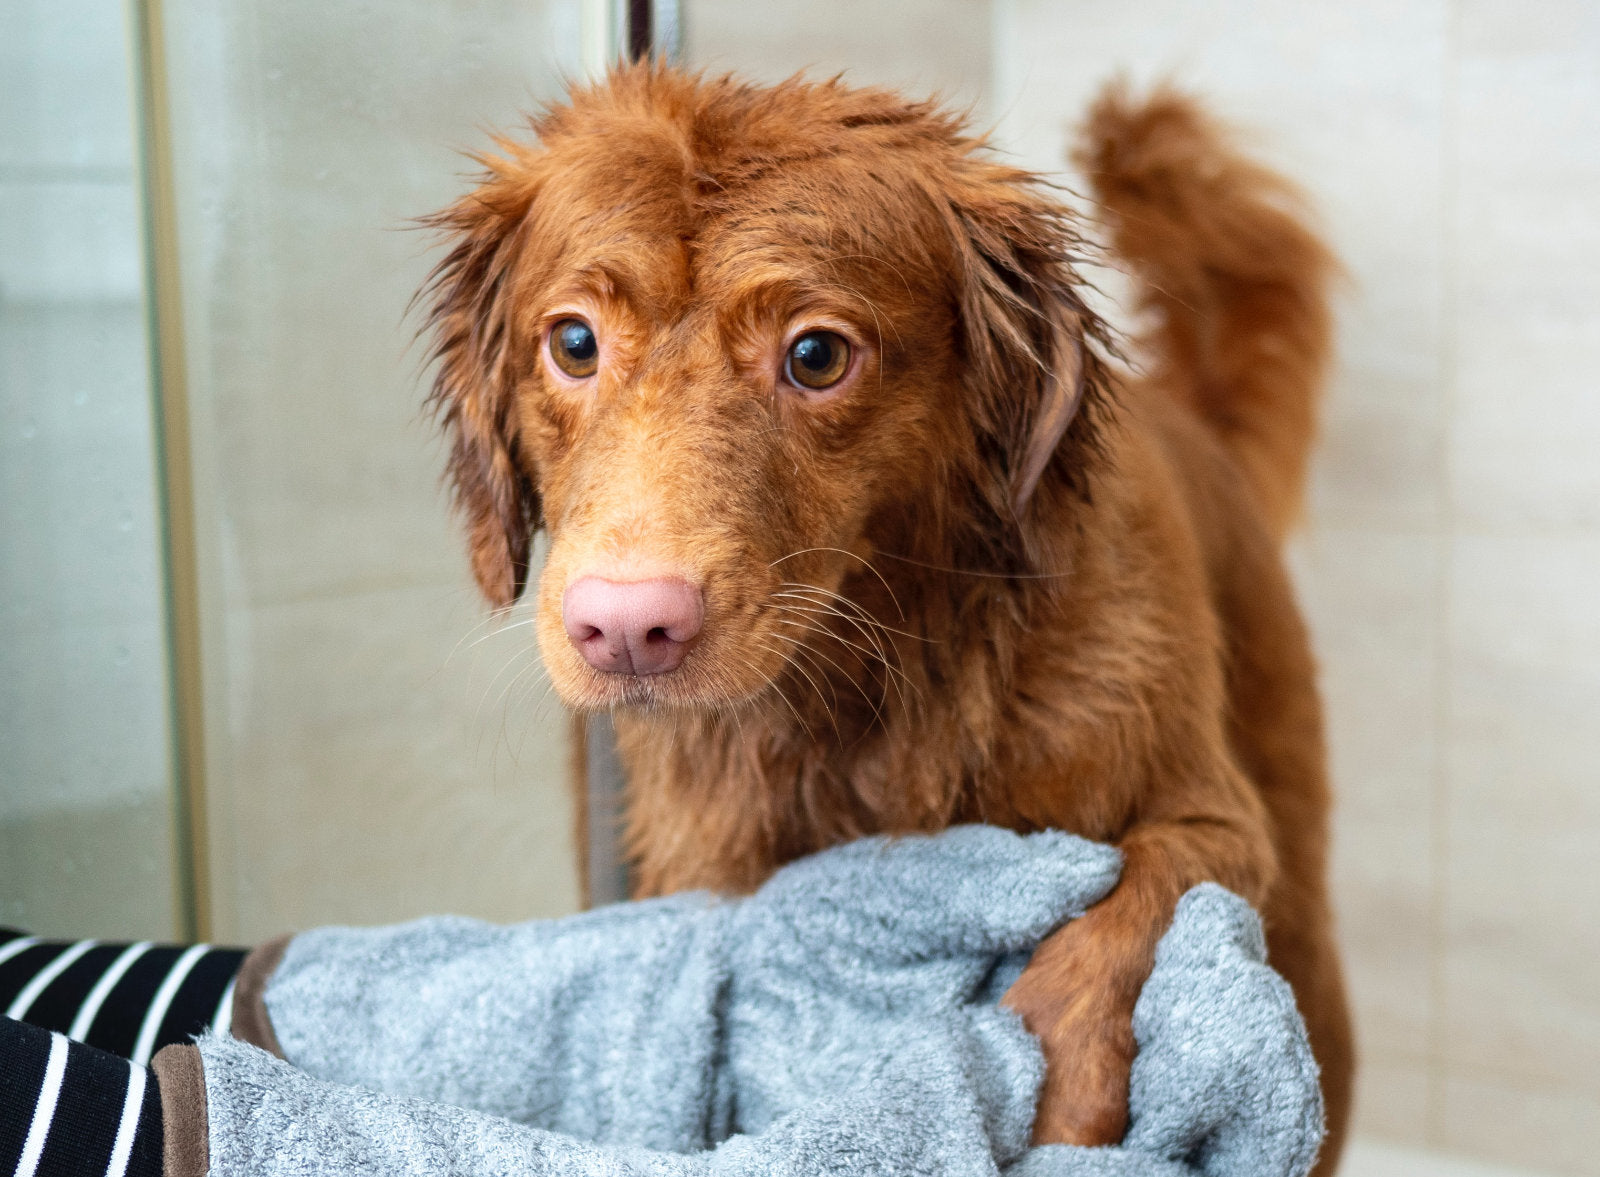 Pet Grooming 101: 5 Questions to Ask Before Your Pet's First Groom